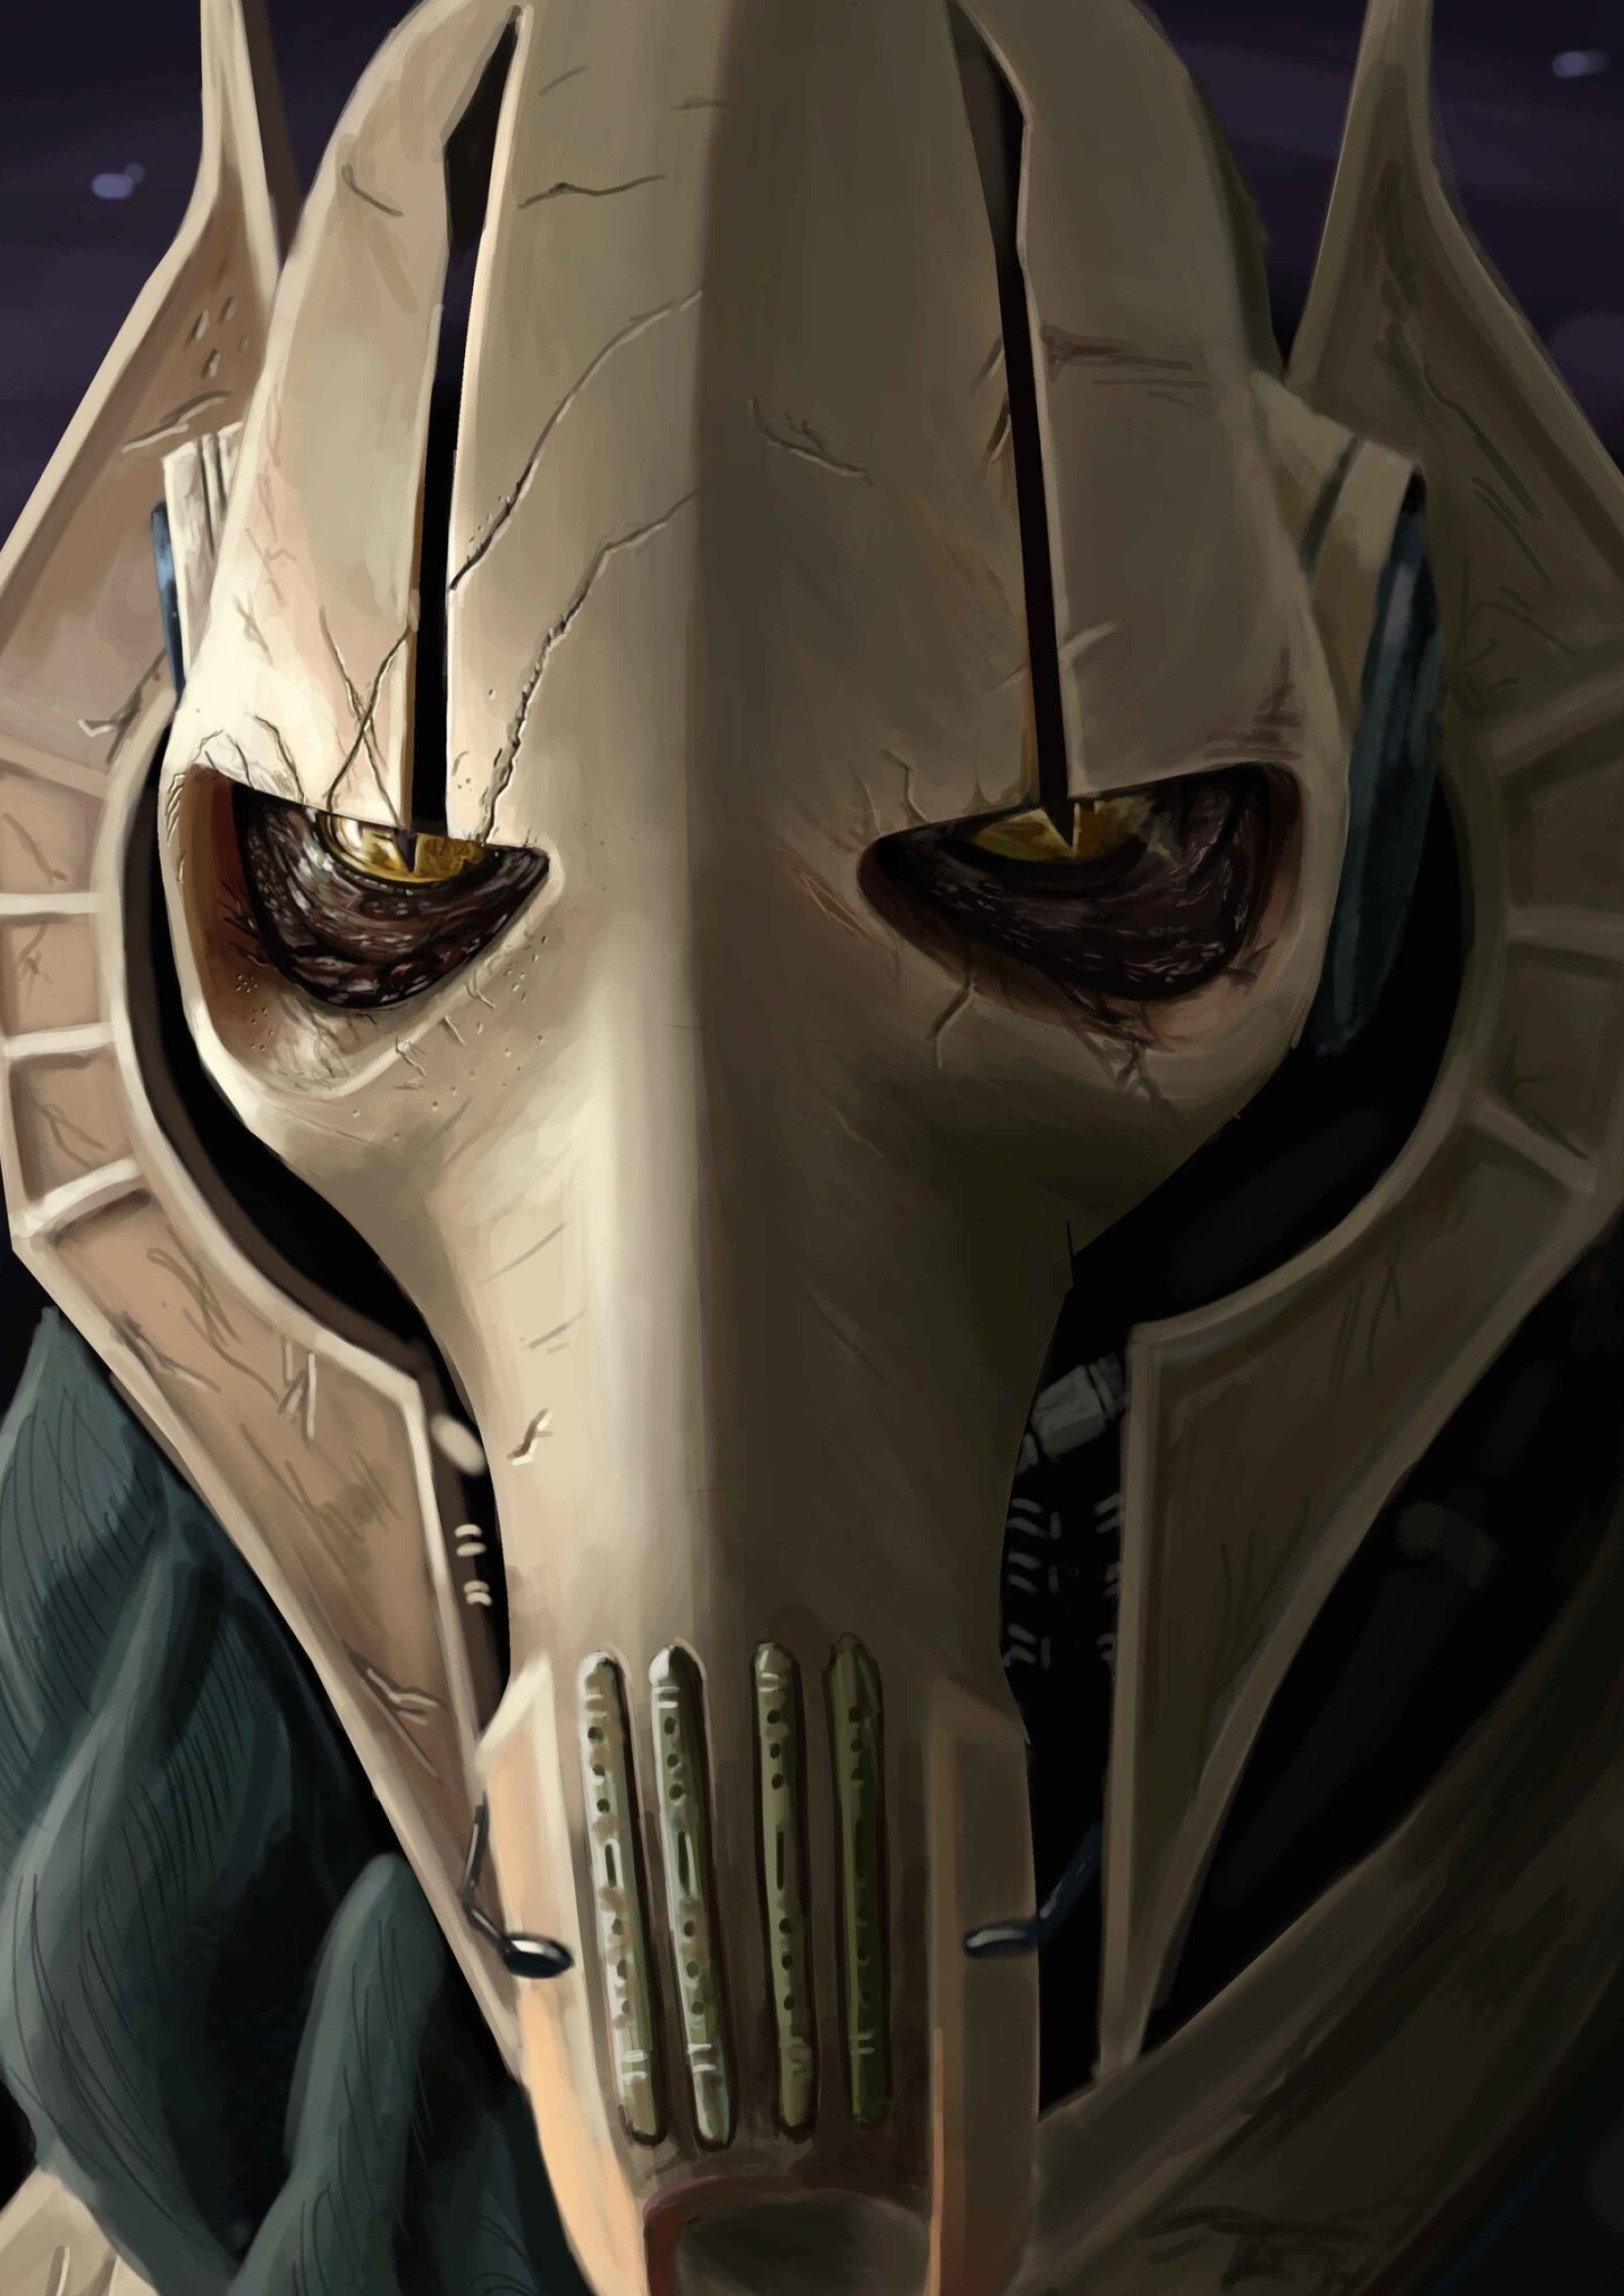 General Grievous: An intense hatred, The Jedi,  Jedi hunter, Collecting the lightsabers of his fallen victims as trophies. 1920x2720 HD Wallpaper.